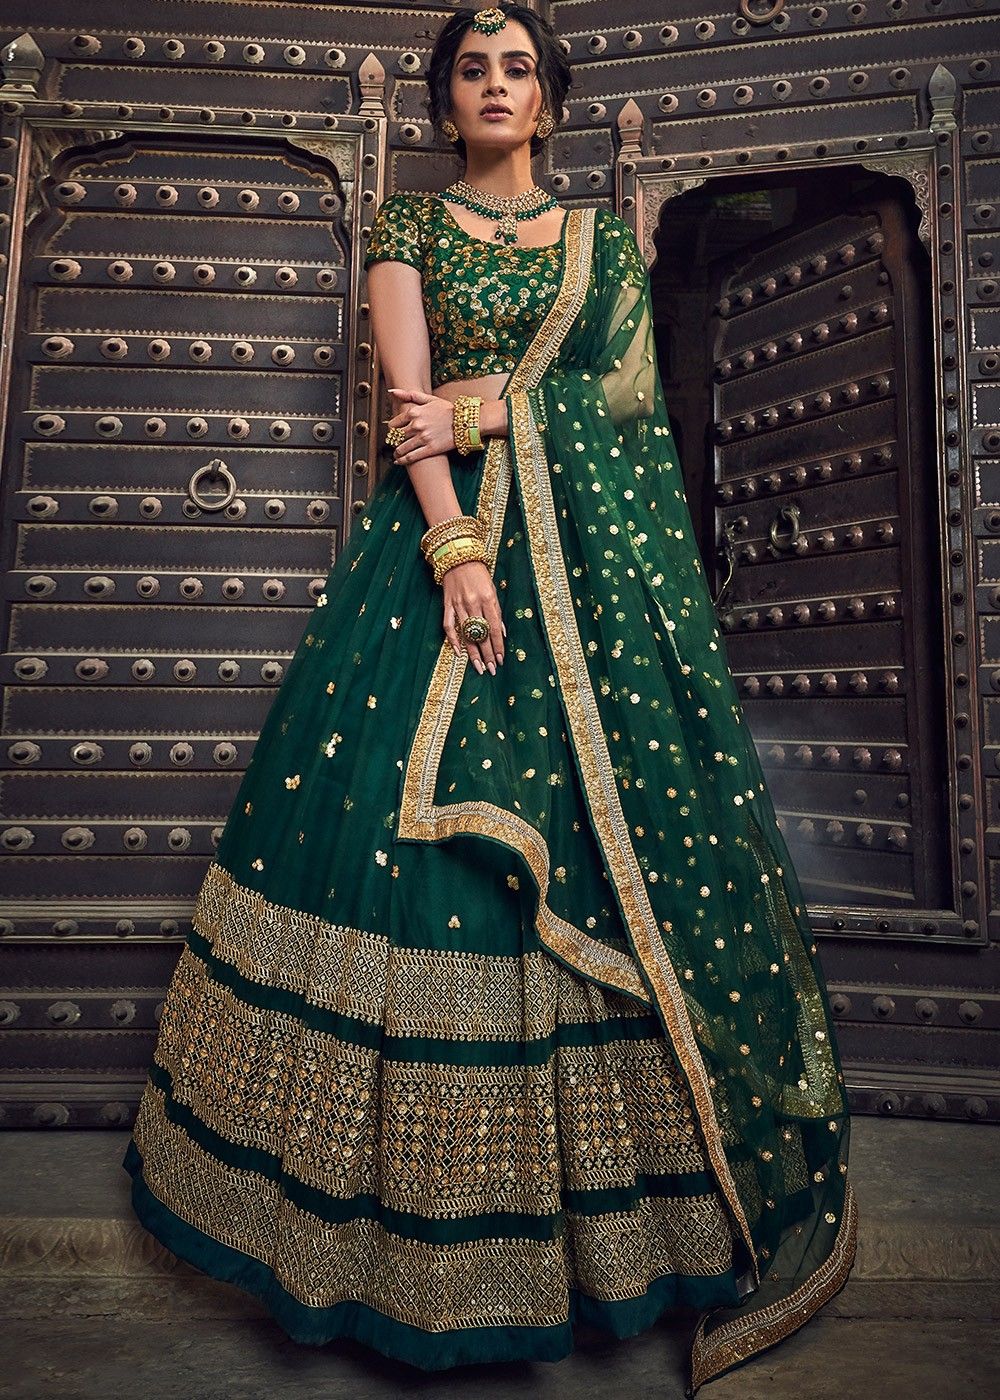 Real Brides in different Hues of Green for their Bridal Lehenga look so  impressive! | WeddingBazaar